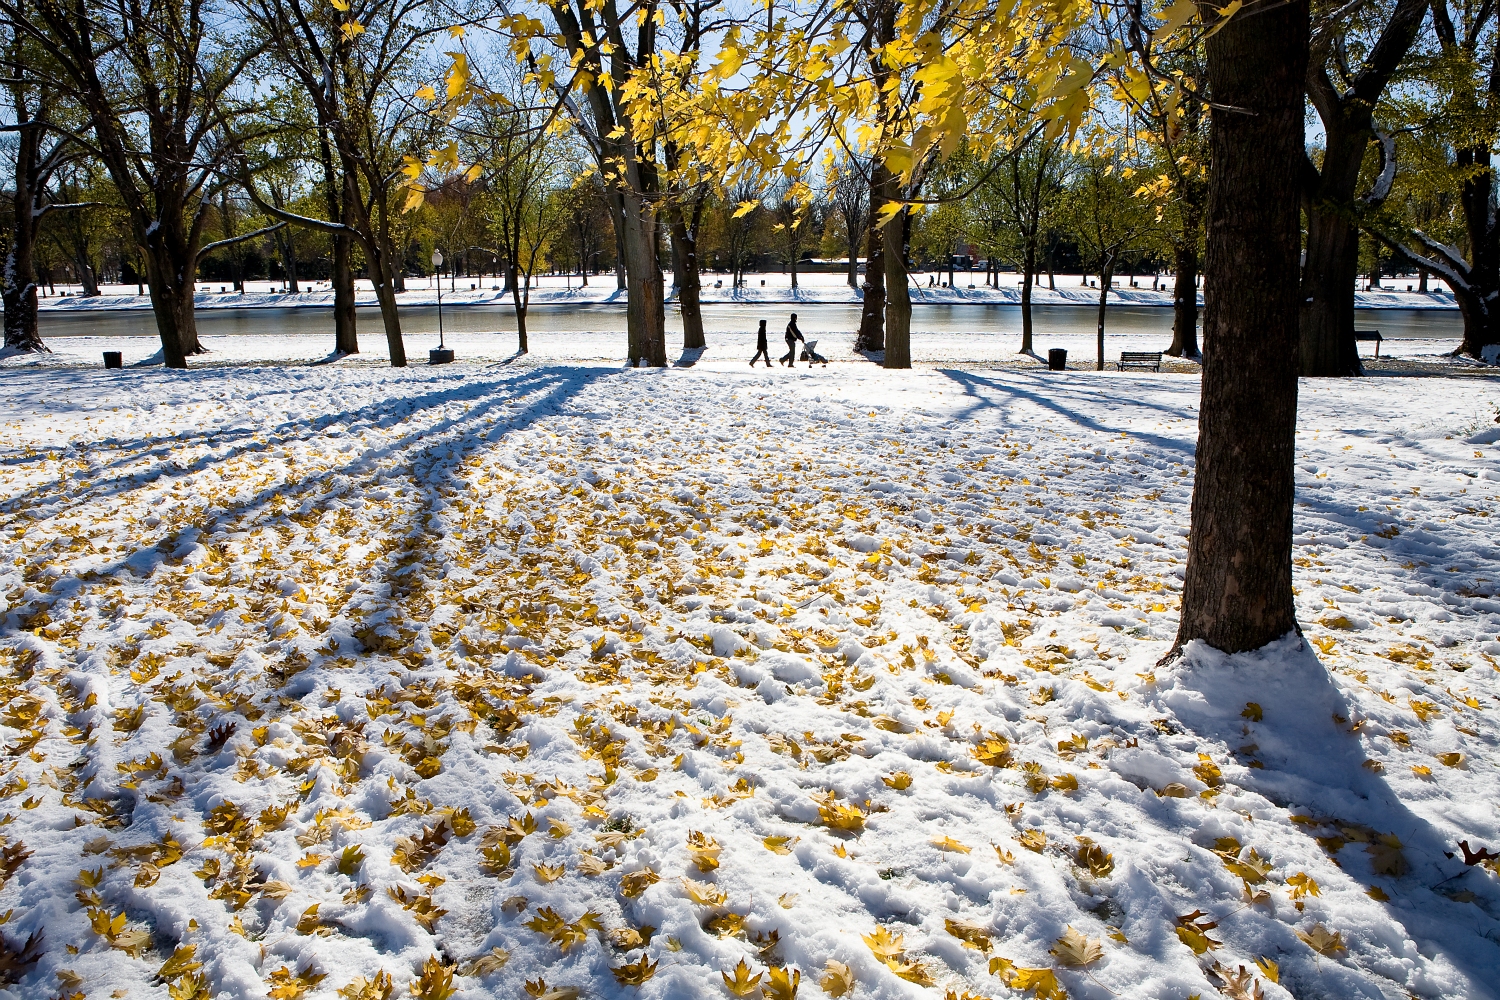 Snow on the Mall, December 6, 2007